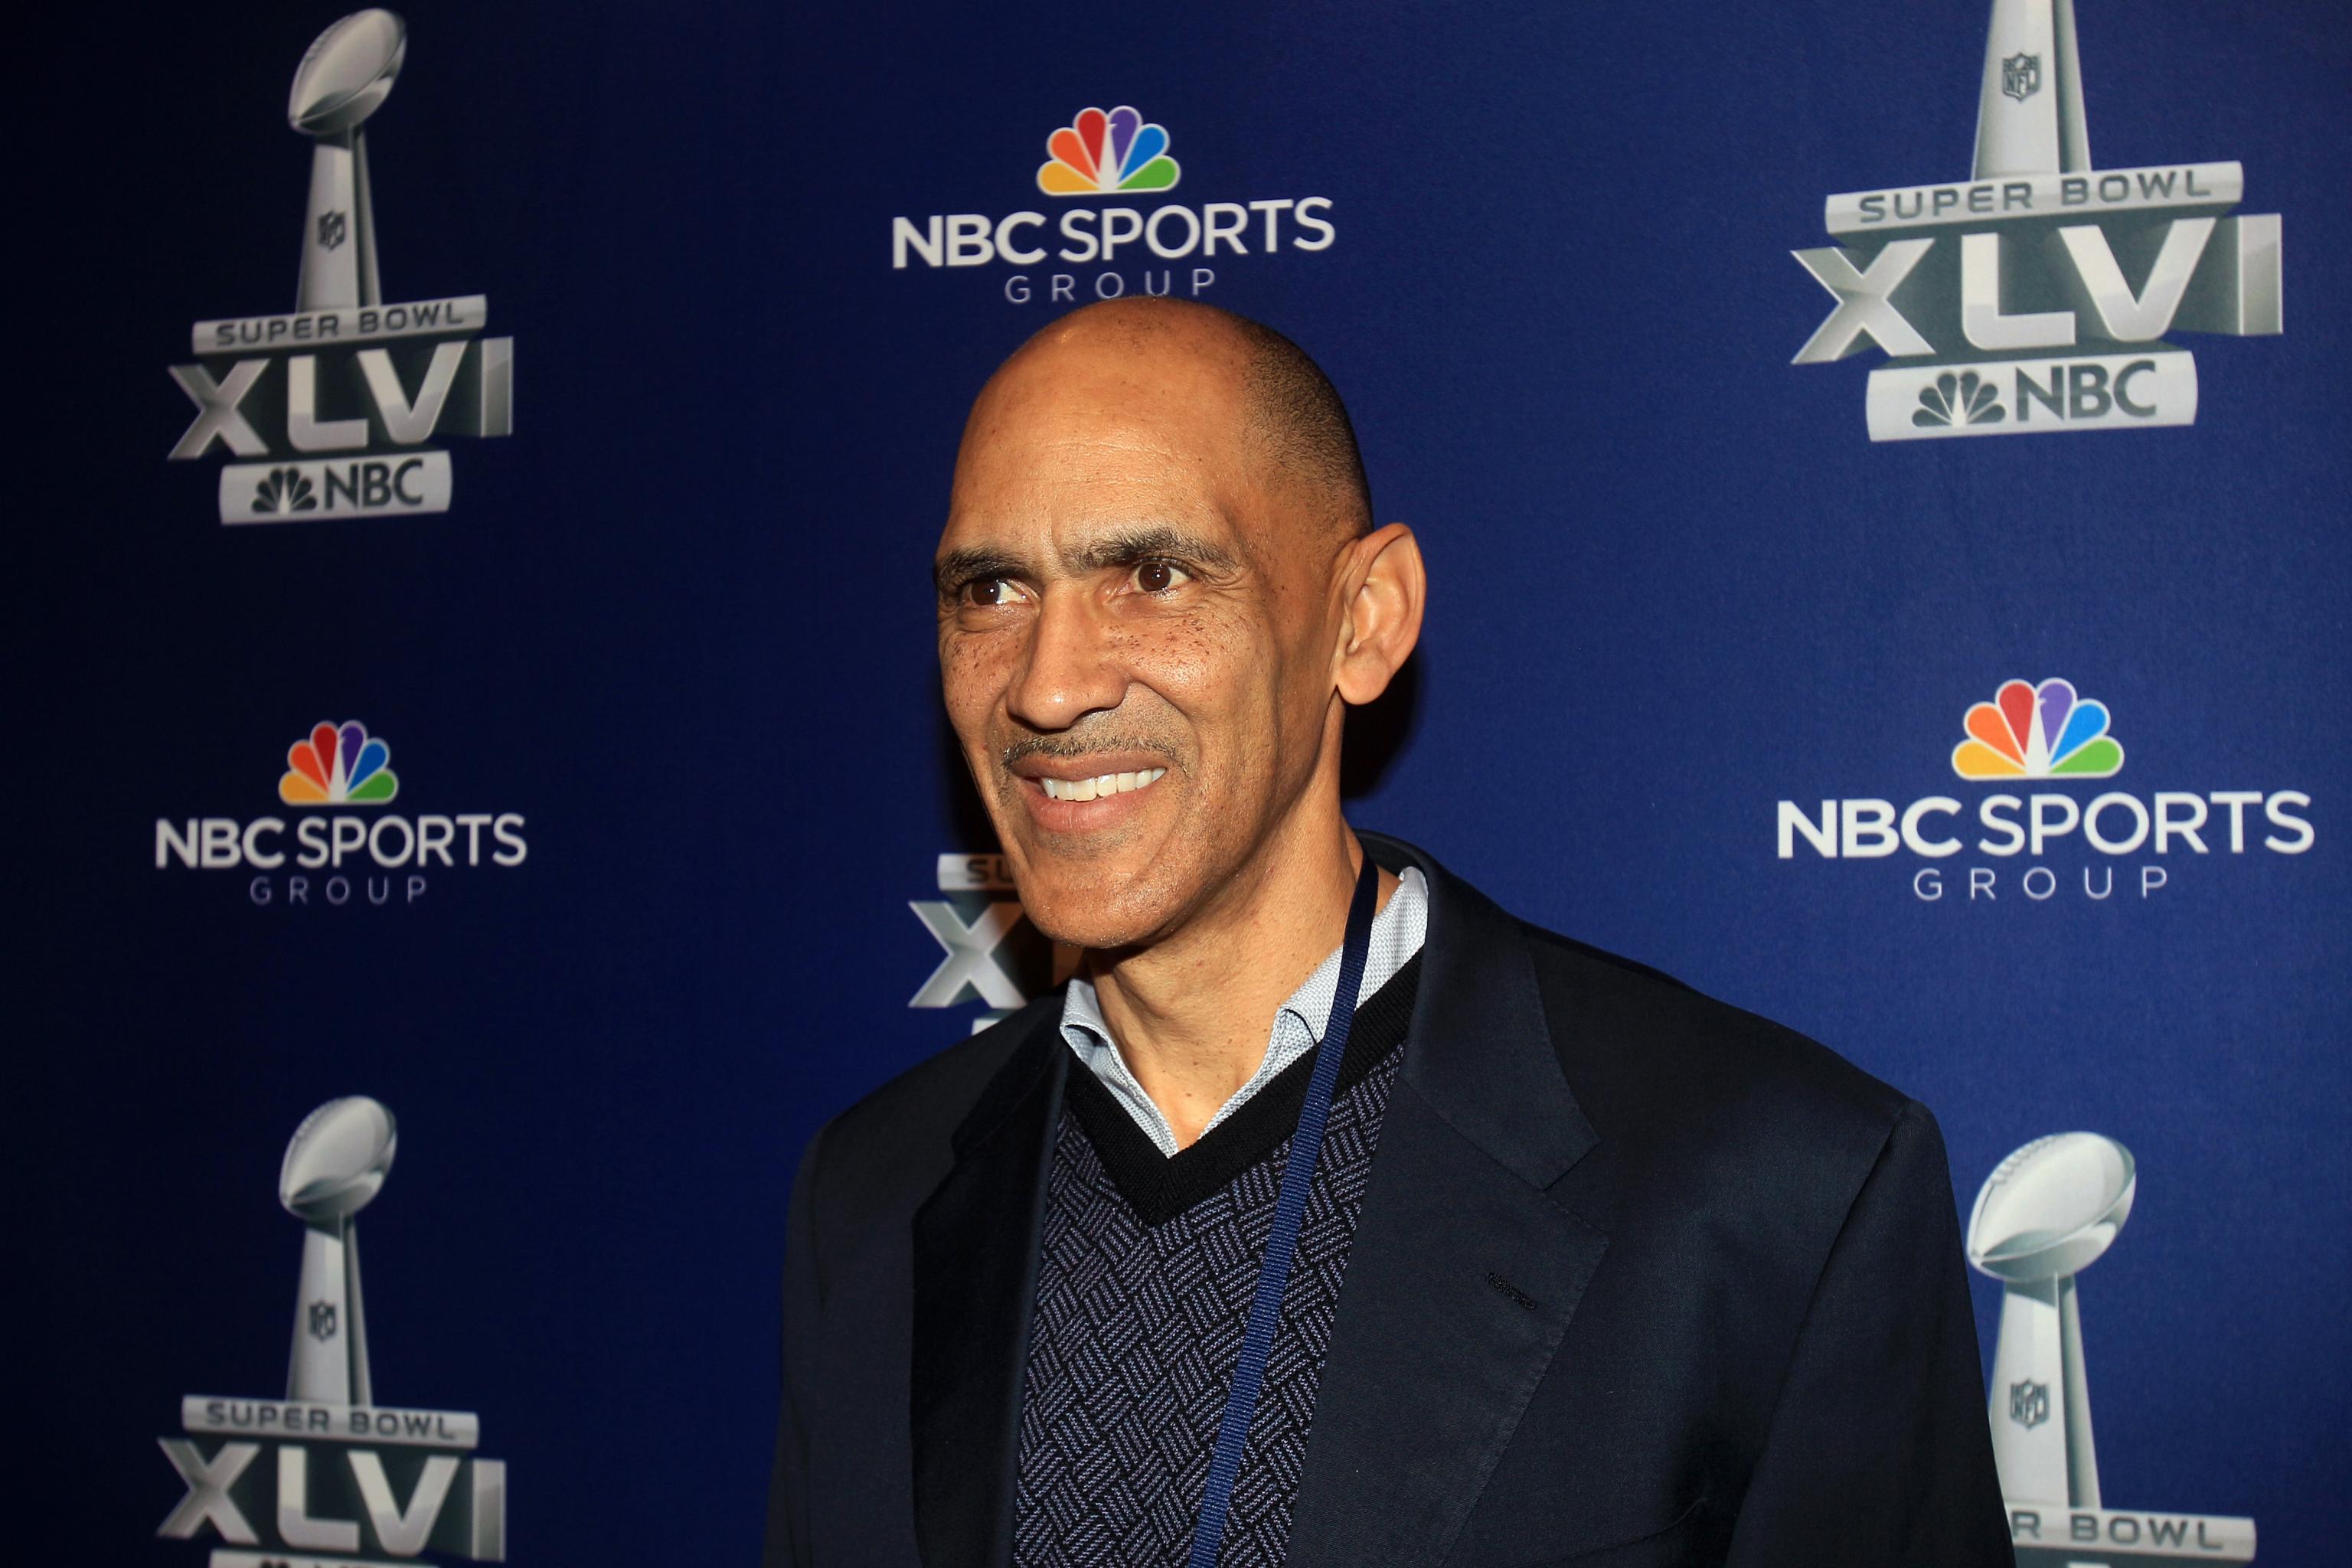 I've repeated this line from Tony Dungy a million times: You can be  demanding without being demeaning. @coachesinsider